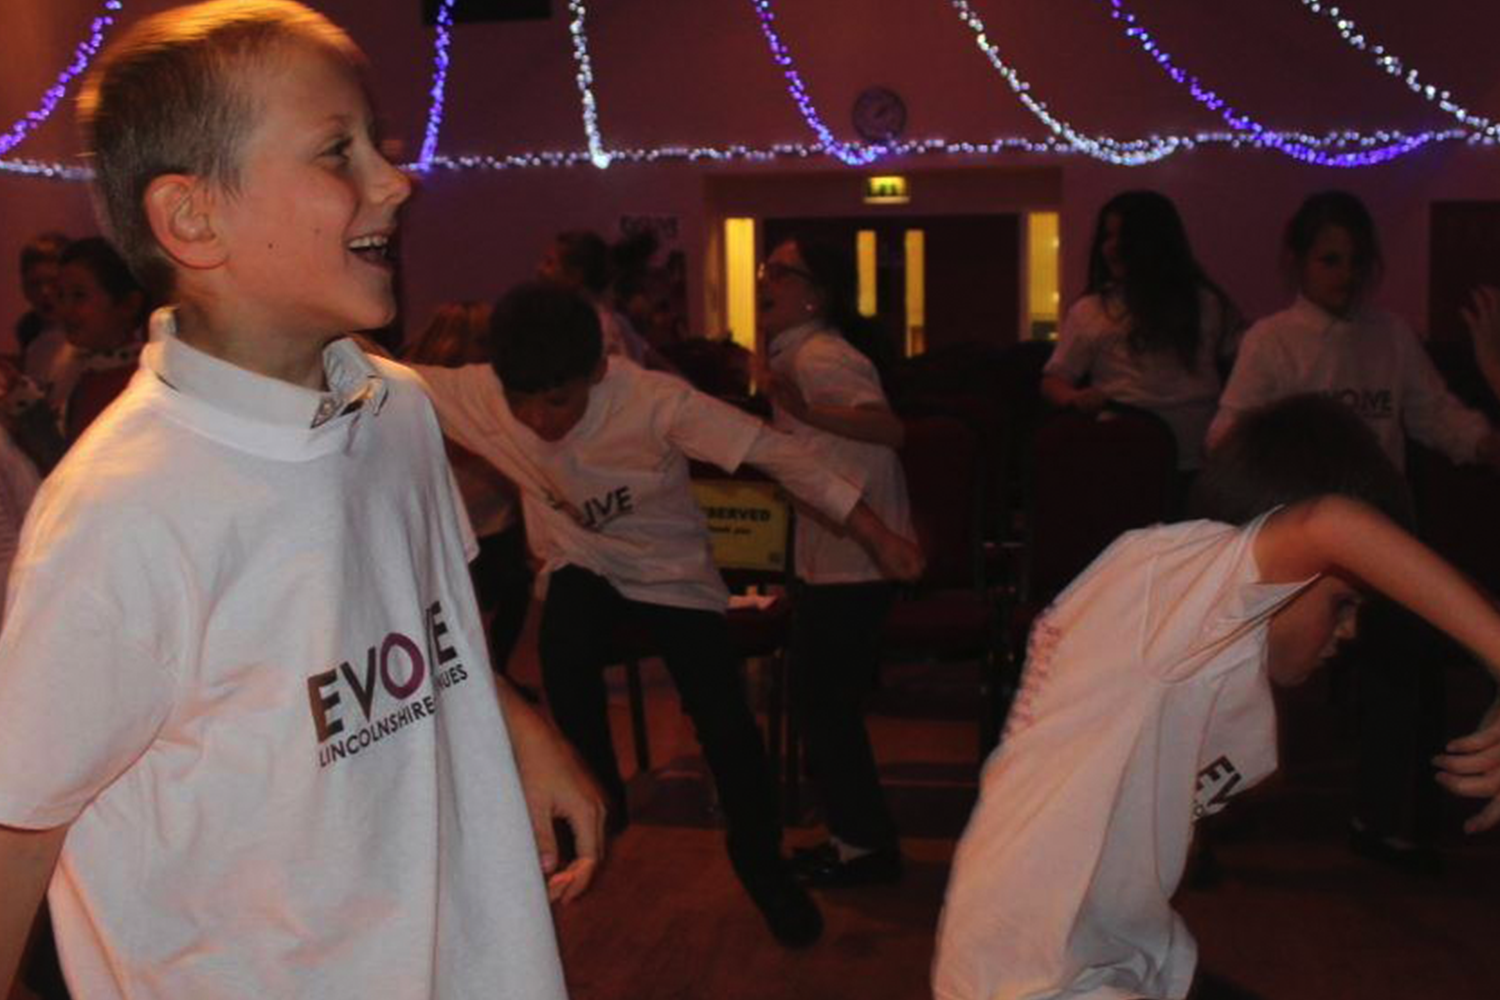 Young people taking part in music project Evolve in Lincolnshire